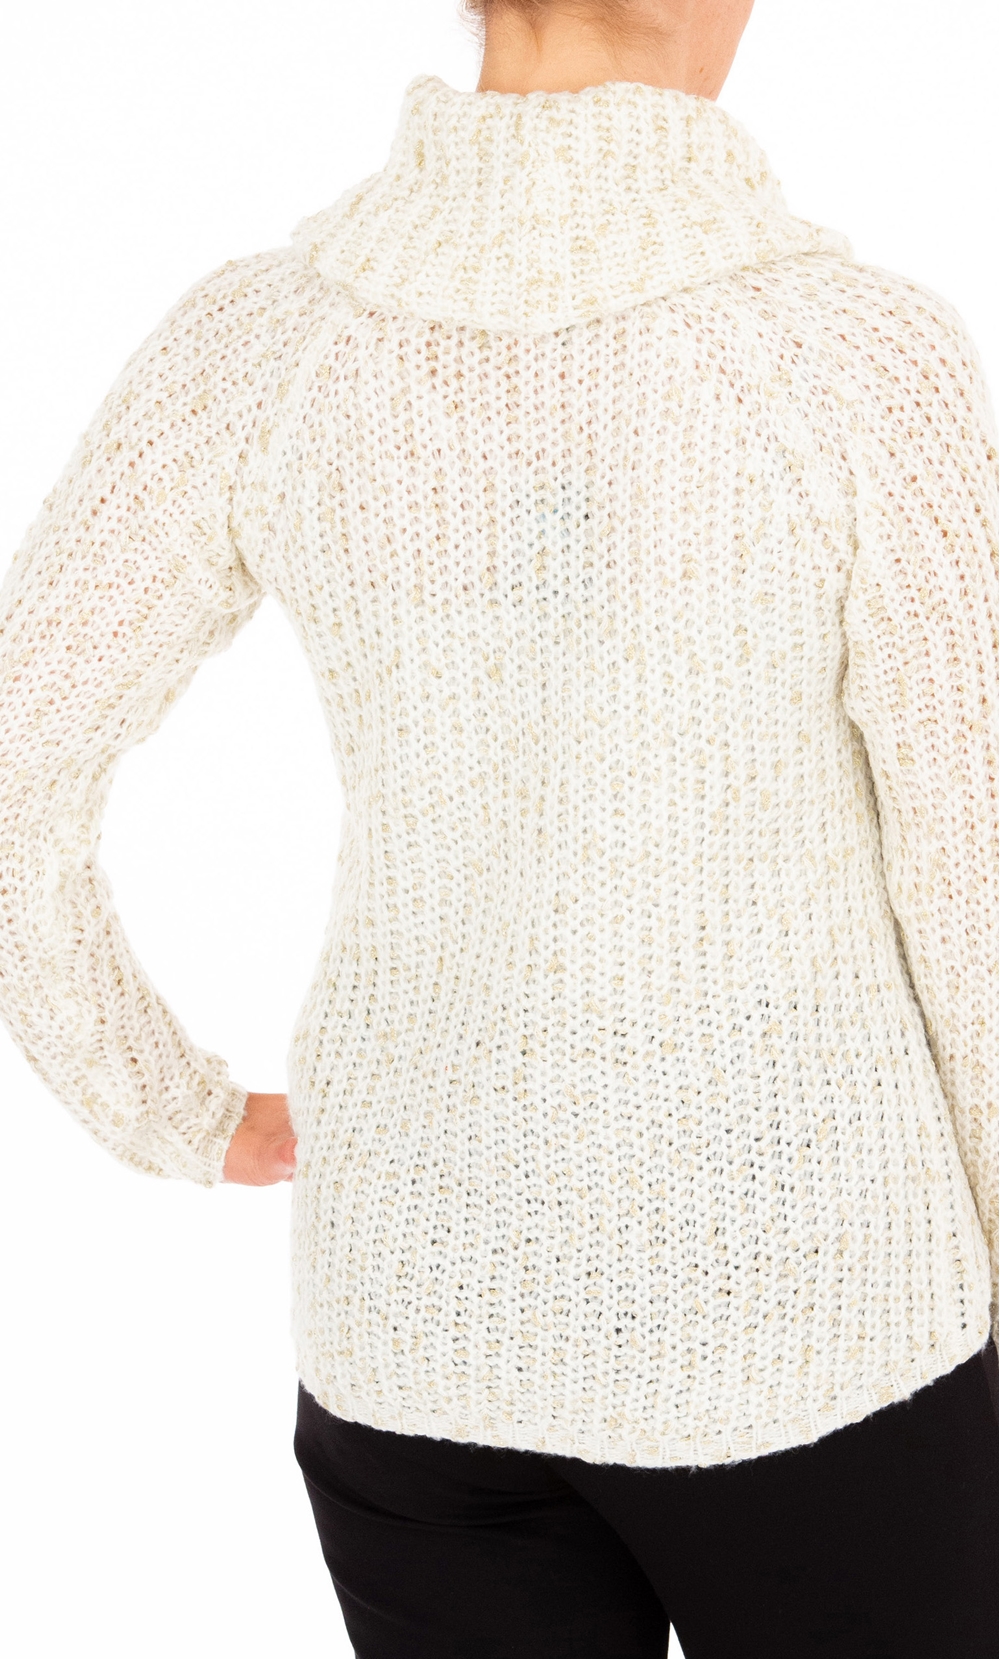 Anna Rose Shimmer Cowl Neck Knit Top